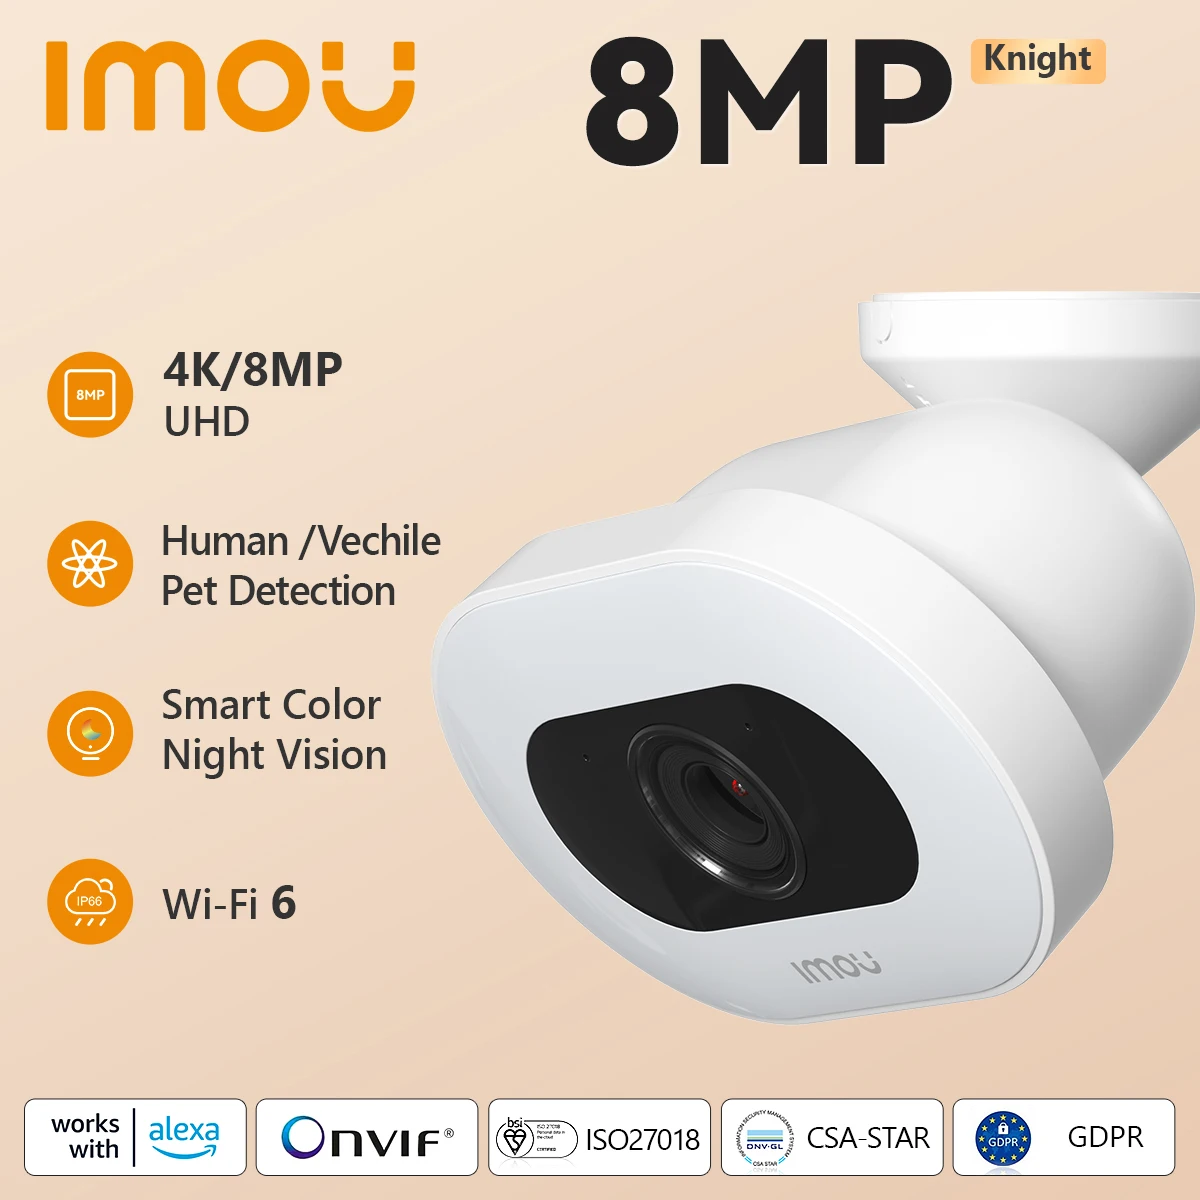 IMOU Knight 4K UHD 8MP Outdoor Security Wifi CCTV Surveillance Camera AI-based Person/Vehicle/Pet Detection